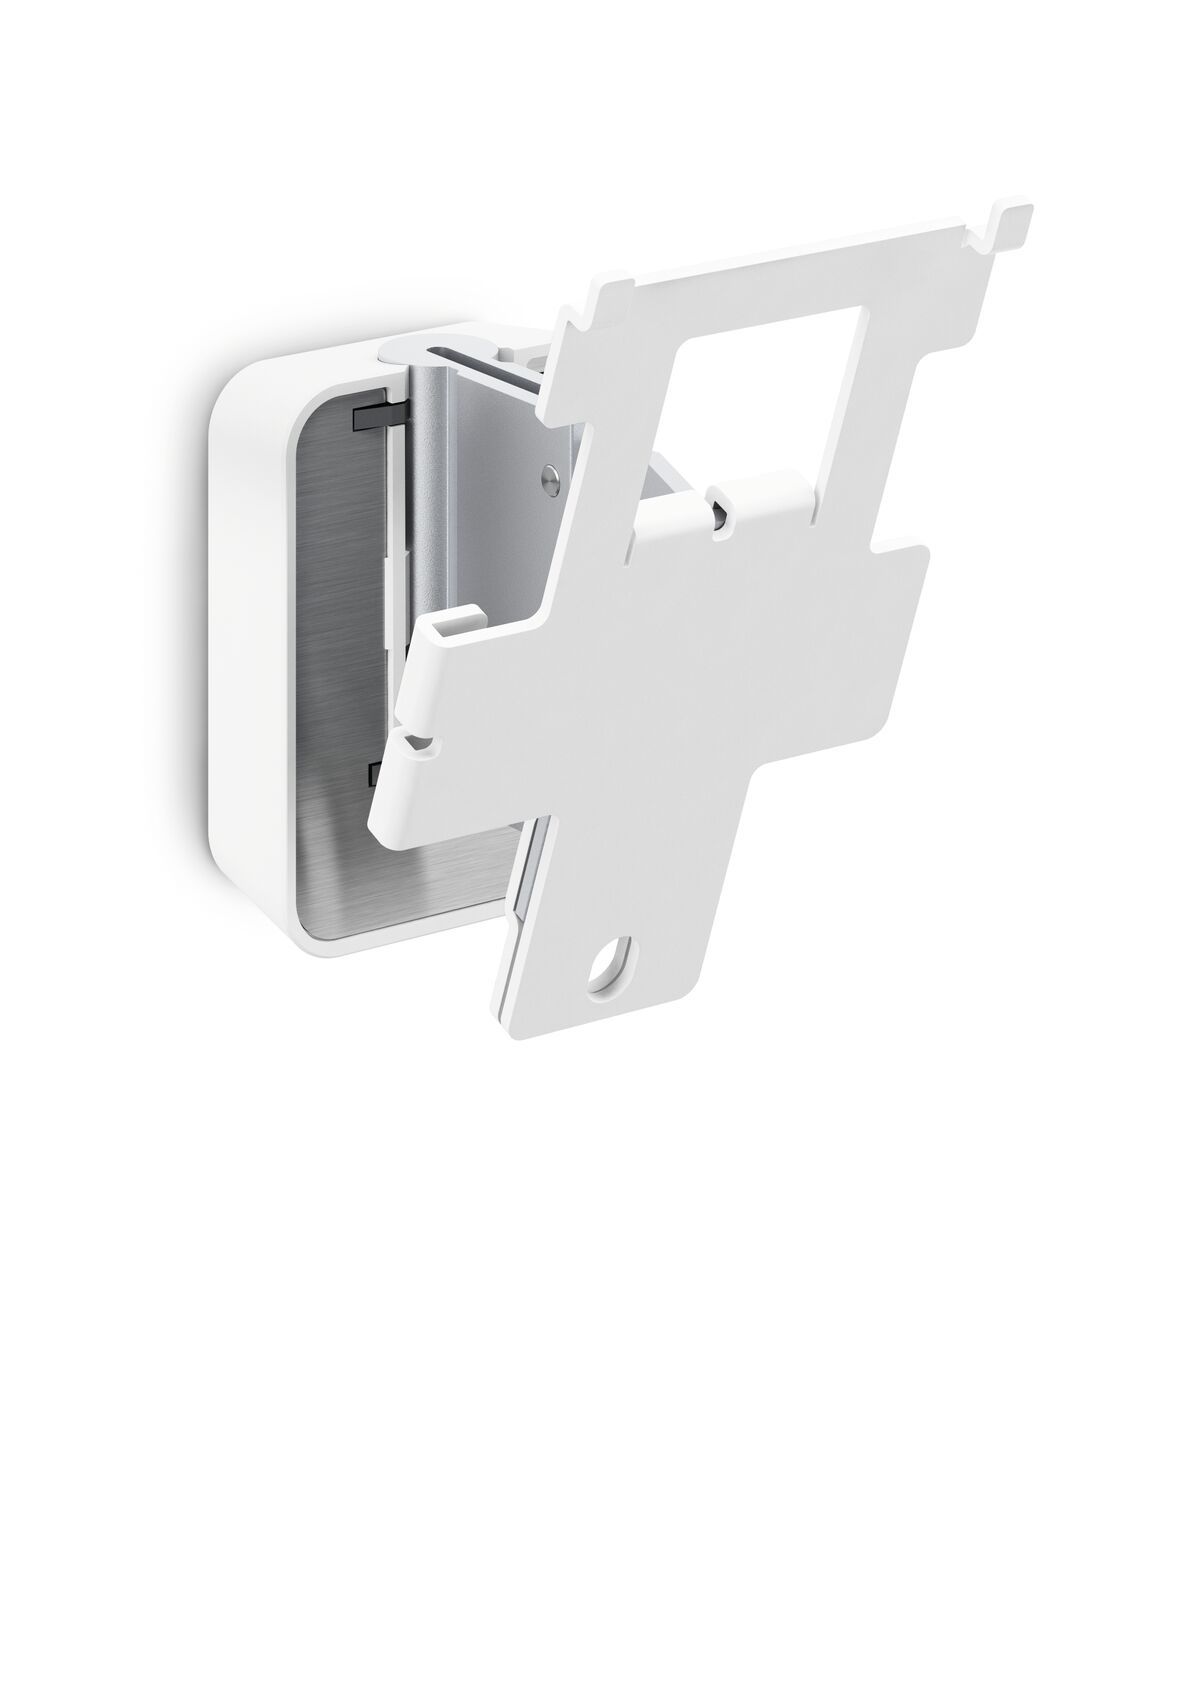 Vogel's SOUND 4203 Speaker Wall Mount for SONOS PLAY:3 (white) - Product